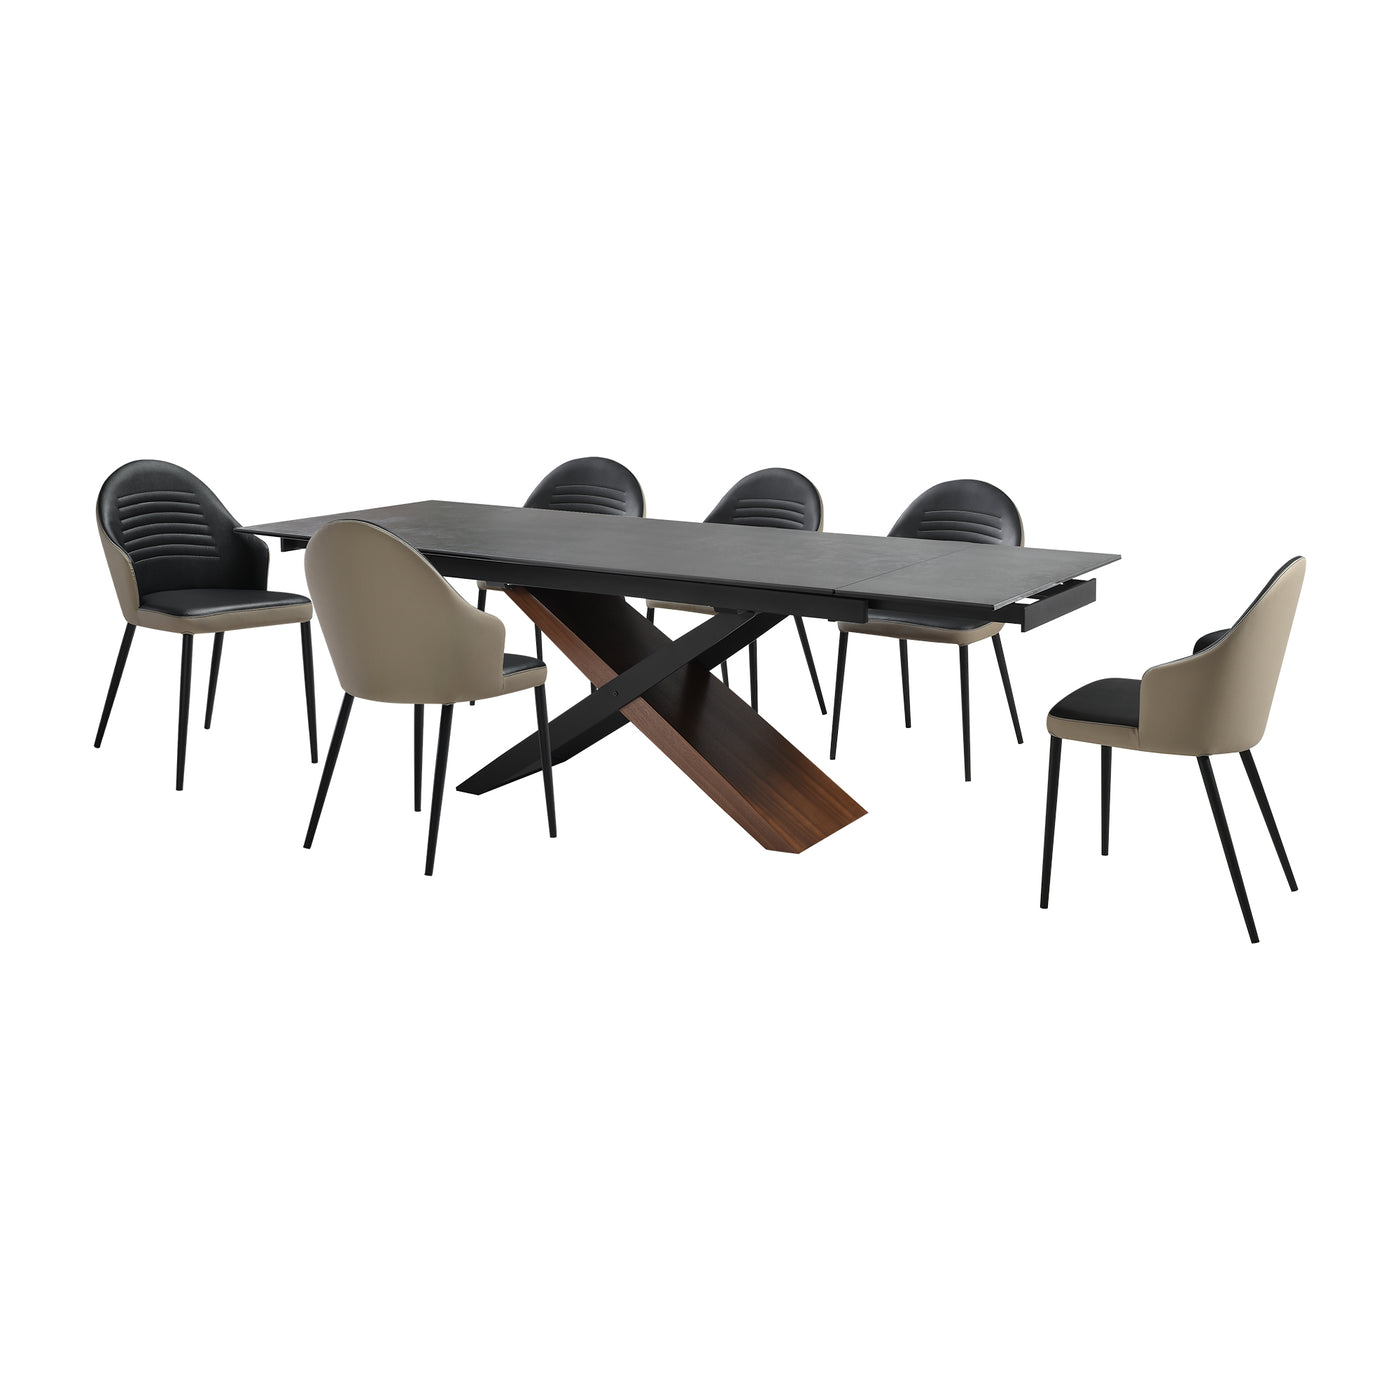 Milena and Rocco 7 Piece Extendable Dining Set